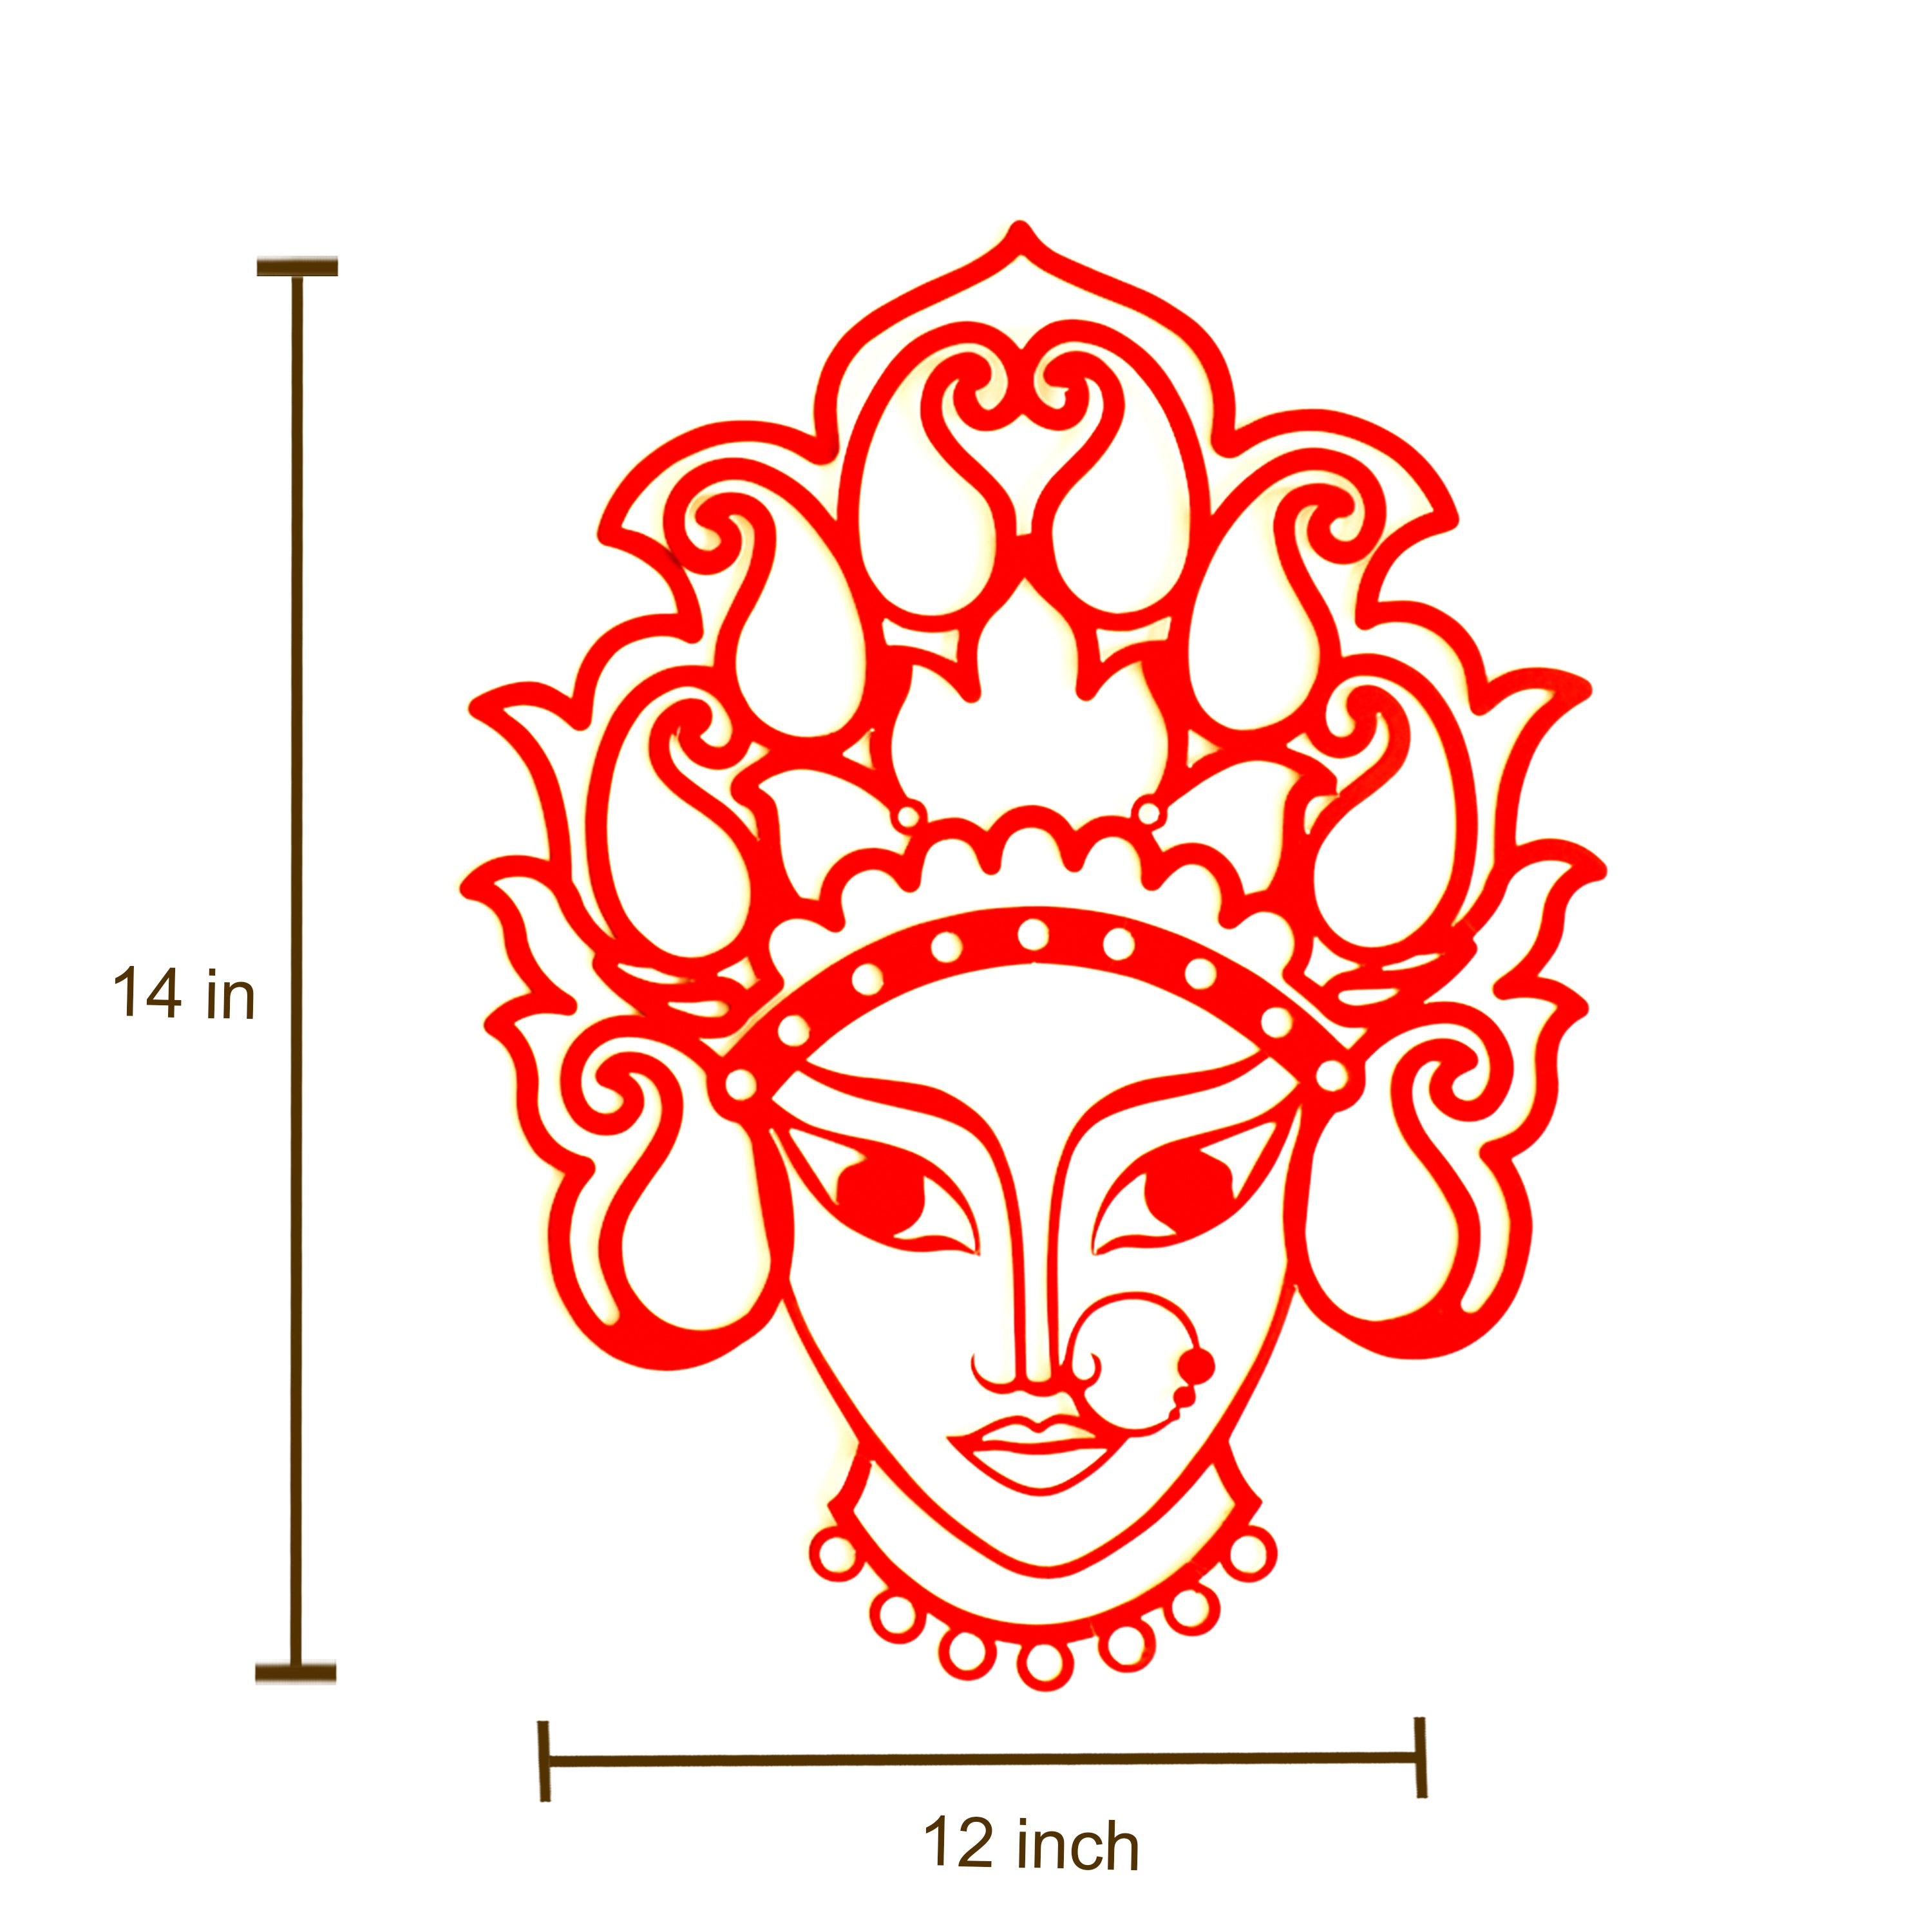 How to draw Maa Durga in simple steps | Easy and simple drawing of Maa Durga.  Durga Puja Special drawing | By Drawing Book | Thank you.